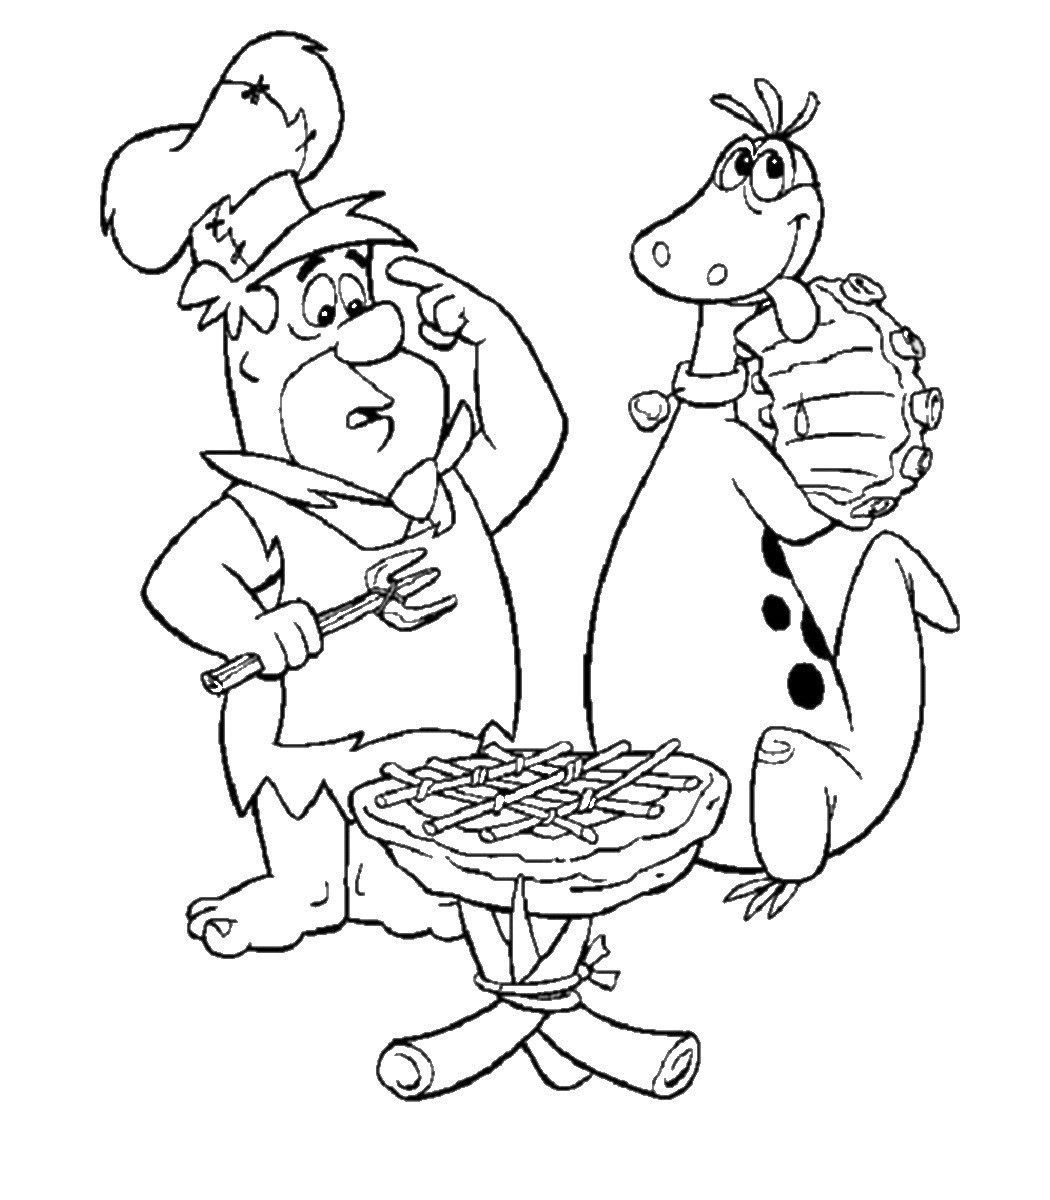 Coloring Sheets Free
 The Flintstones Coloring Pages